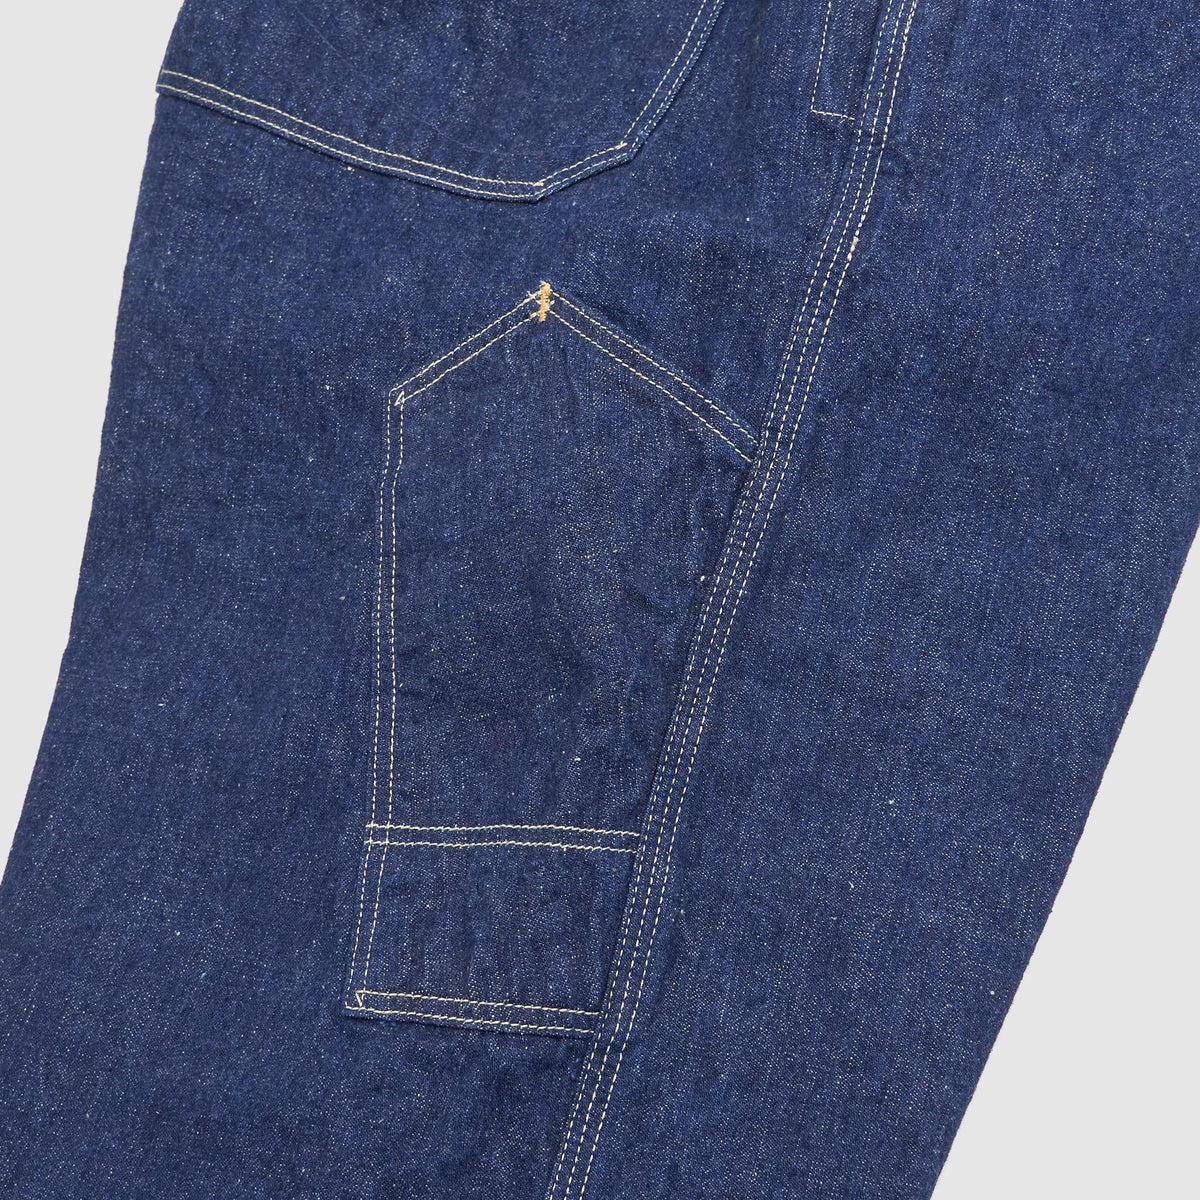 OrSlow Overall Dungarees Denim